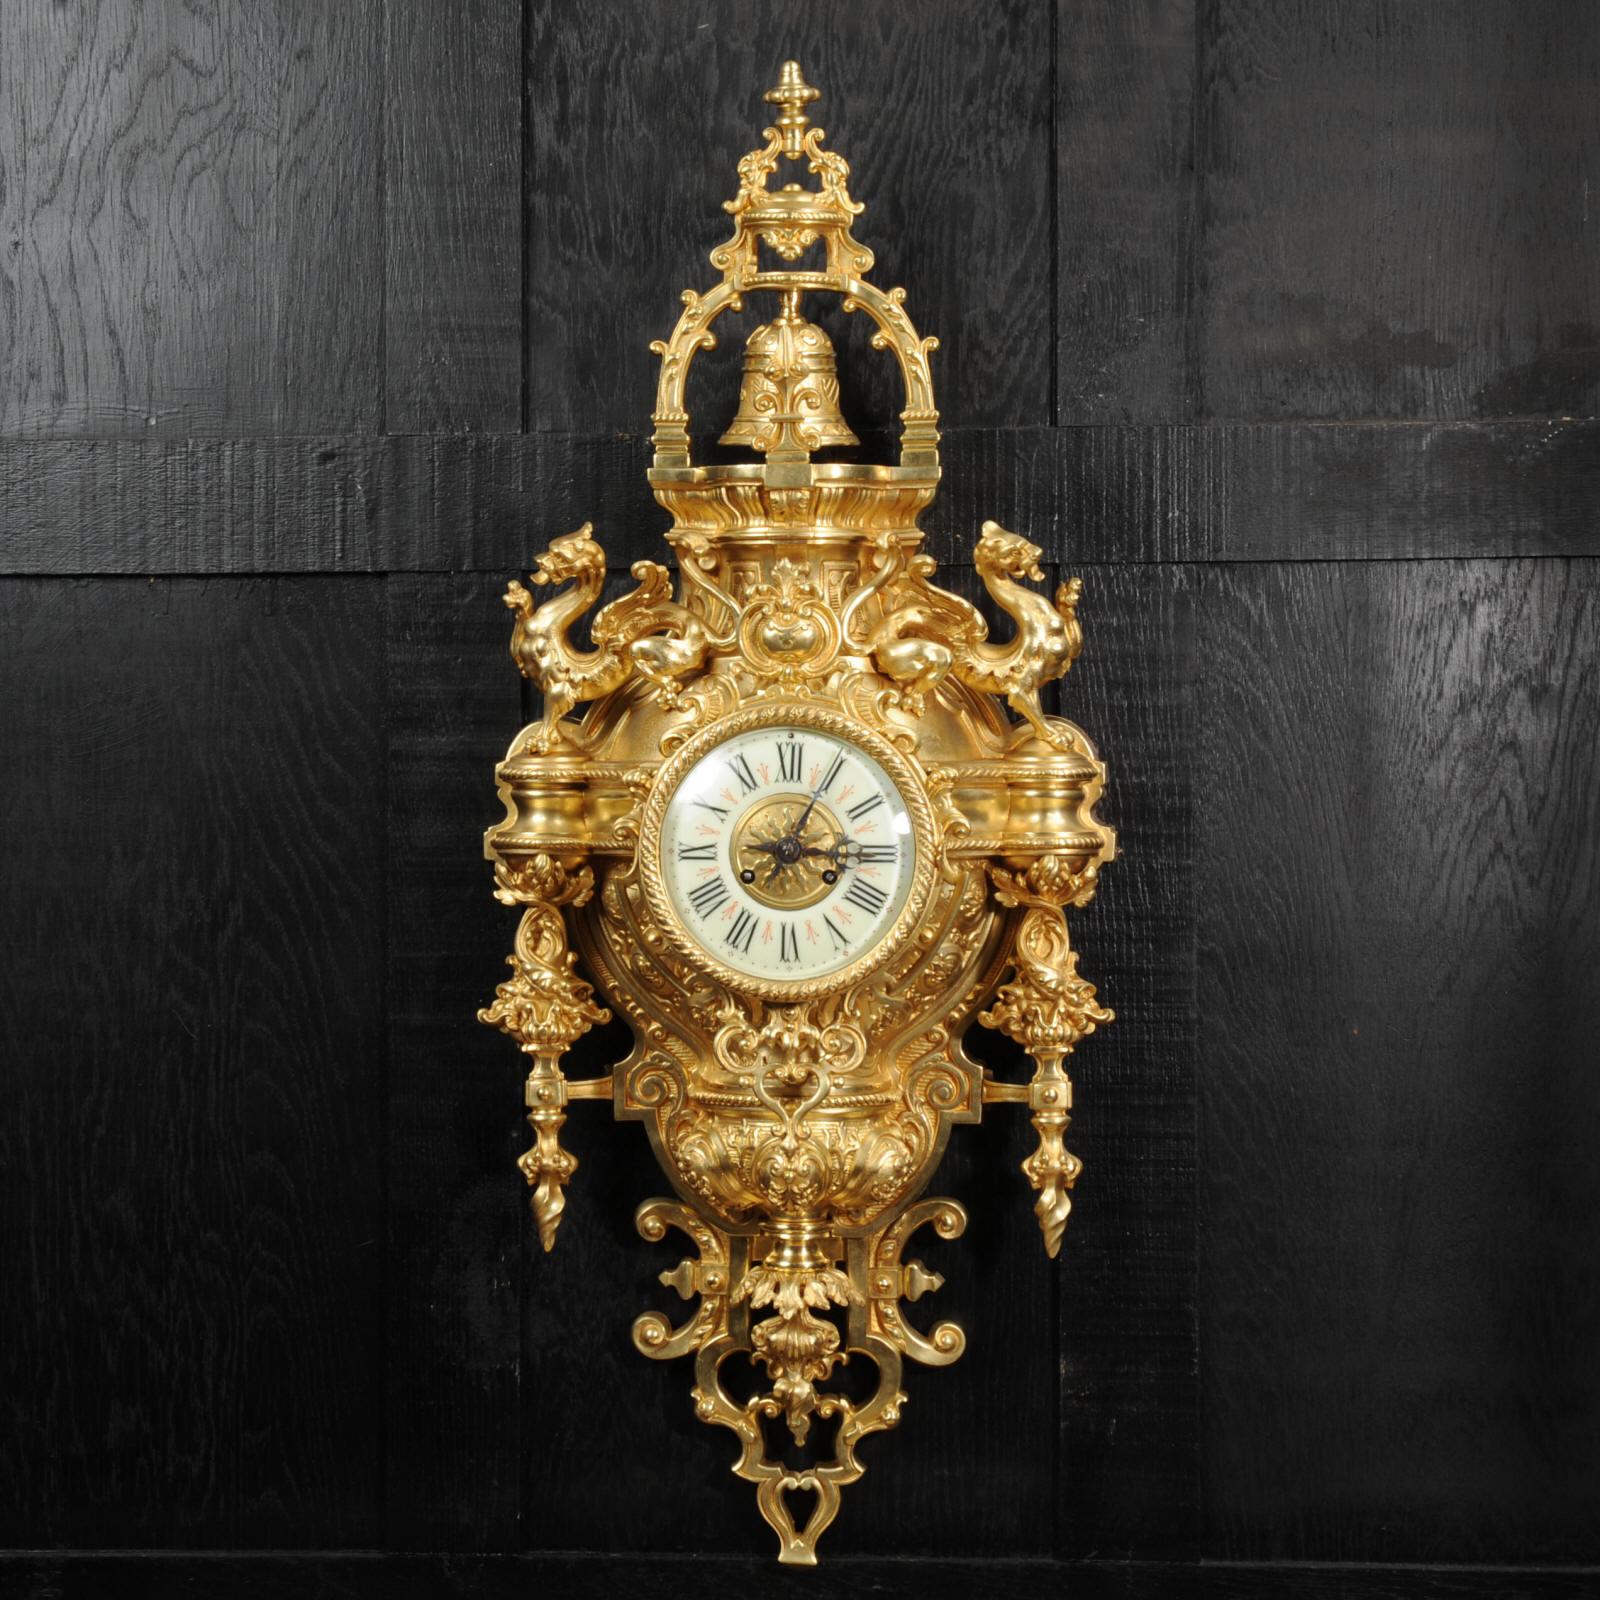 A magnificent gilded bronze cartel clock featuring two dragons standing guard above the clock, circa 1870. It is baroque in style with mythical creatures, stylised foliage and a bell hung from an arch to the top. It is almost 32 inches in height and